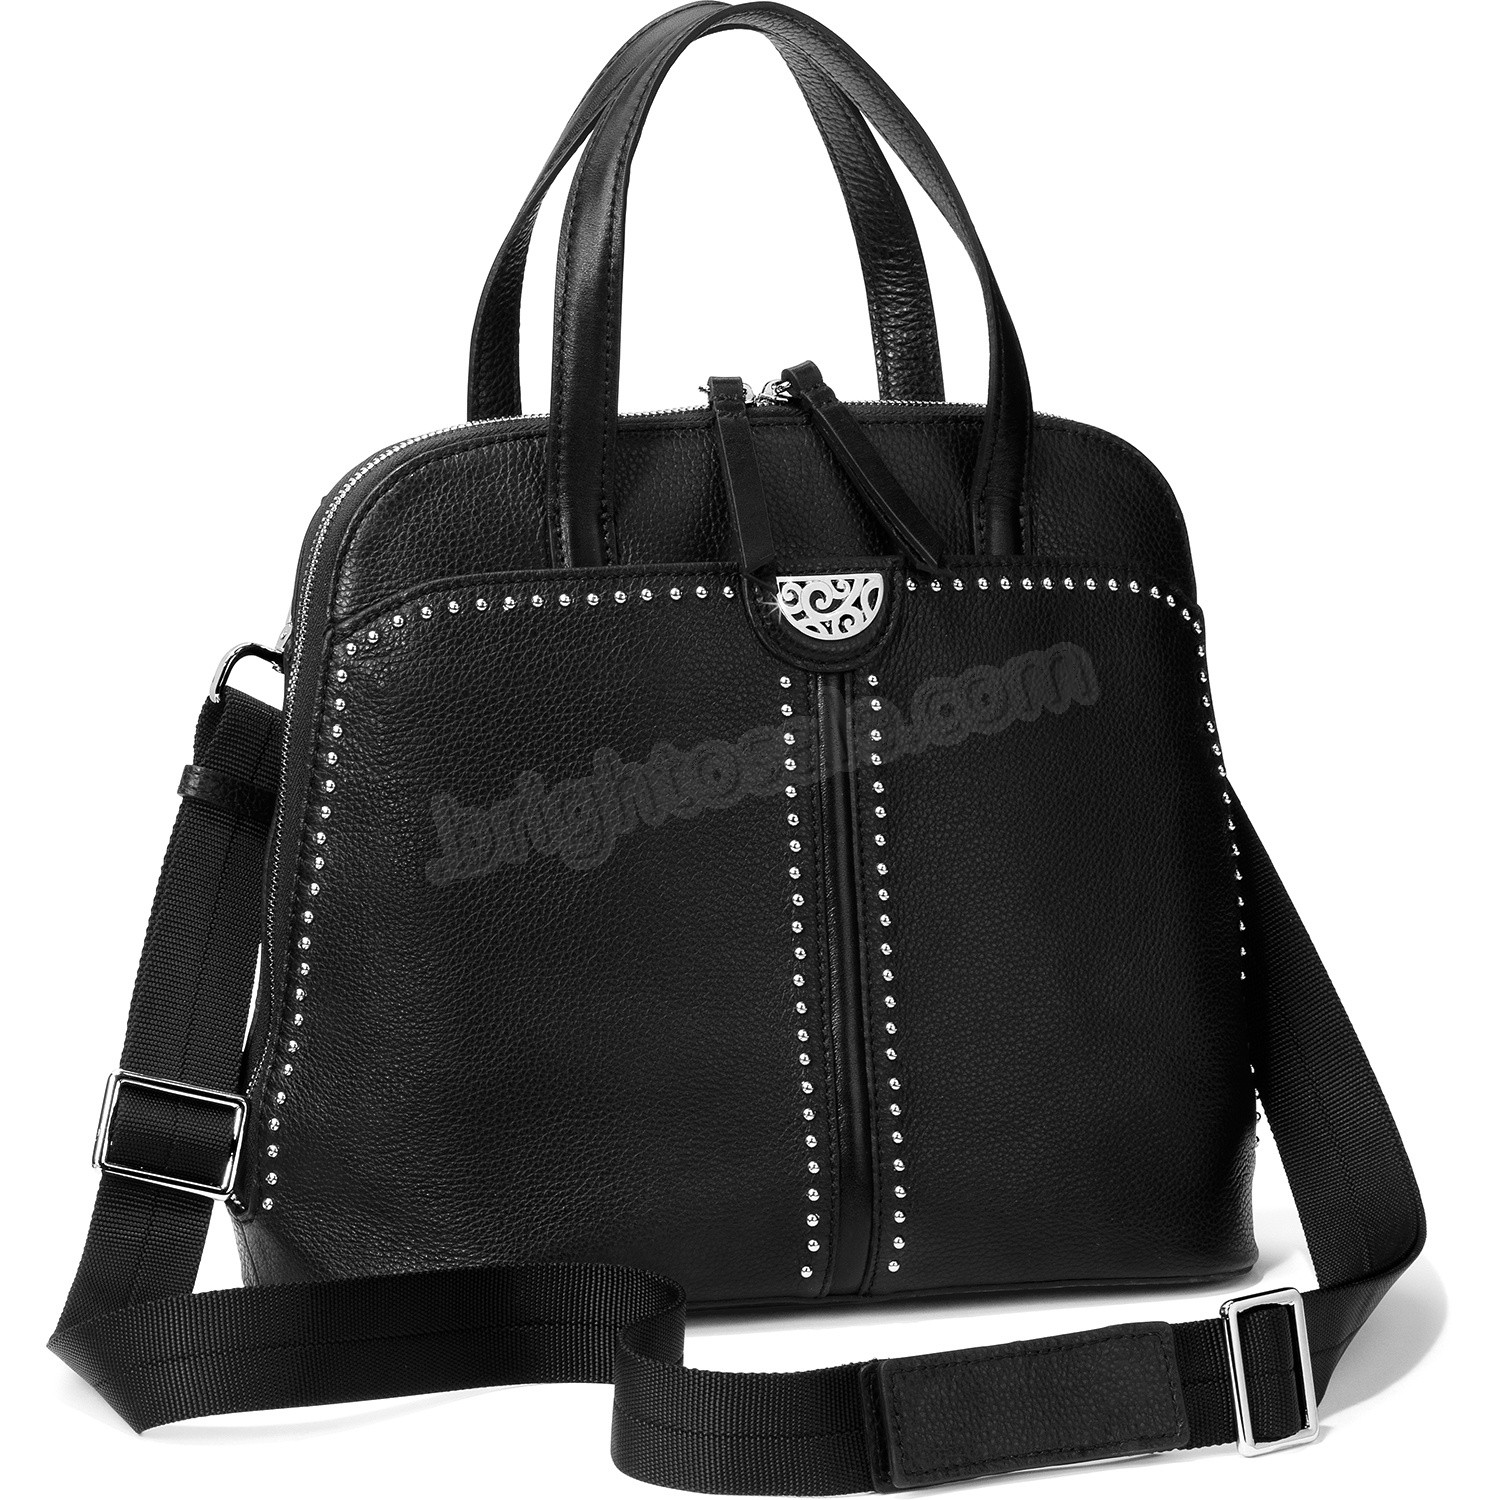 Brighton Collectibles & Online Discount Kingston Backpack - Brighton Collectibles & Online Discount Kingston Backpack